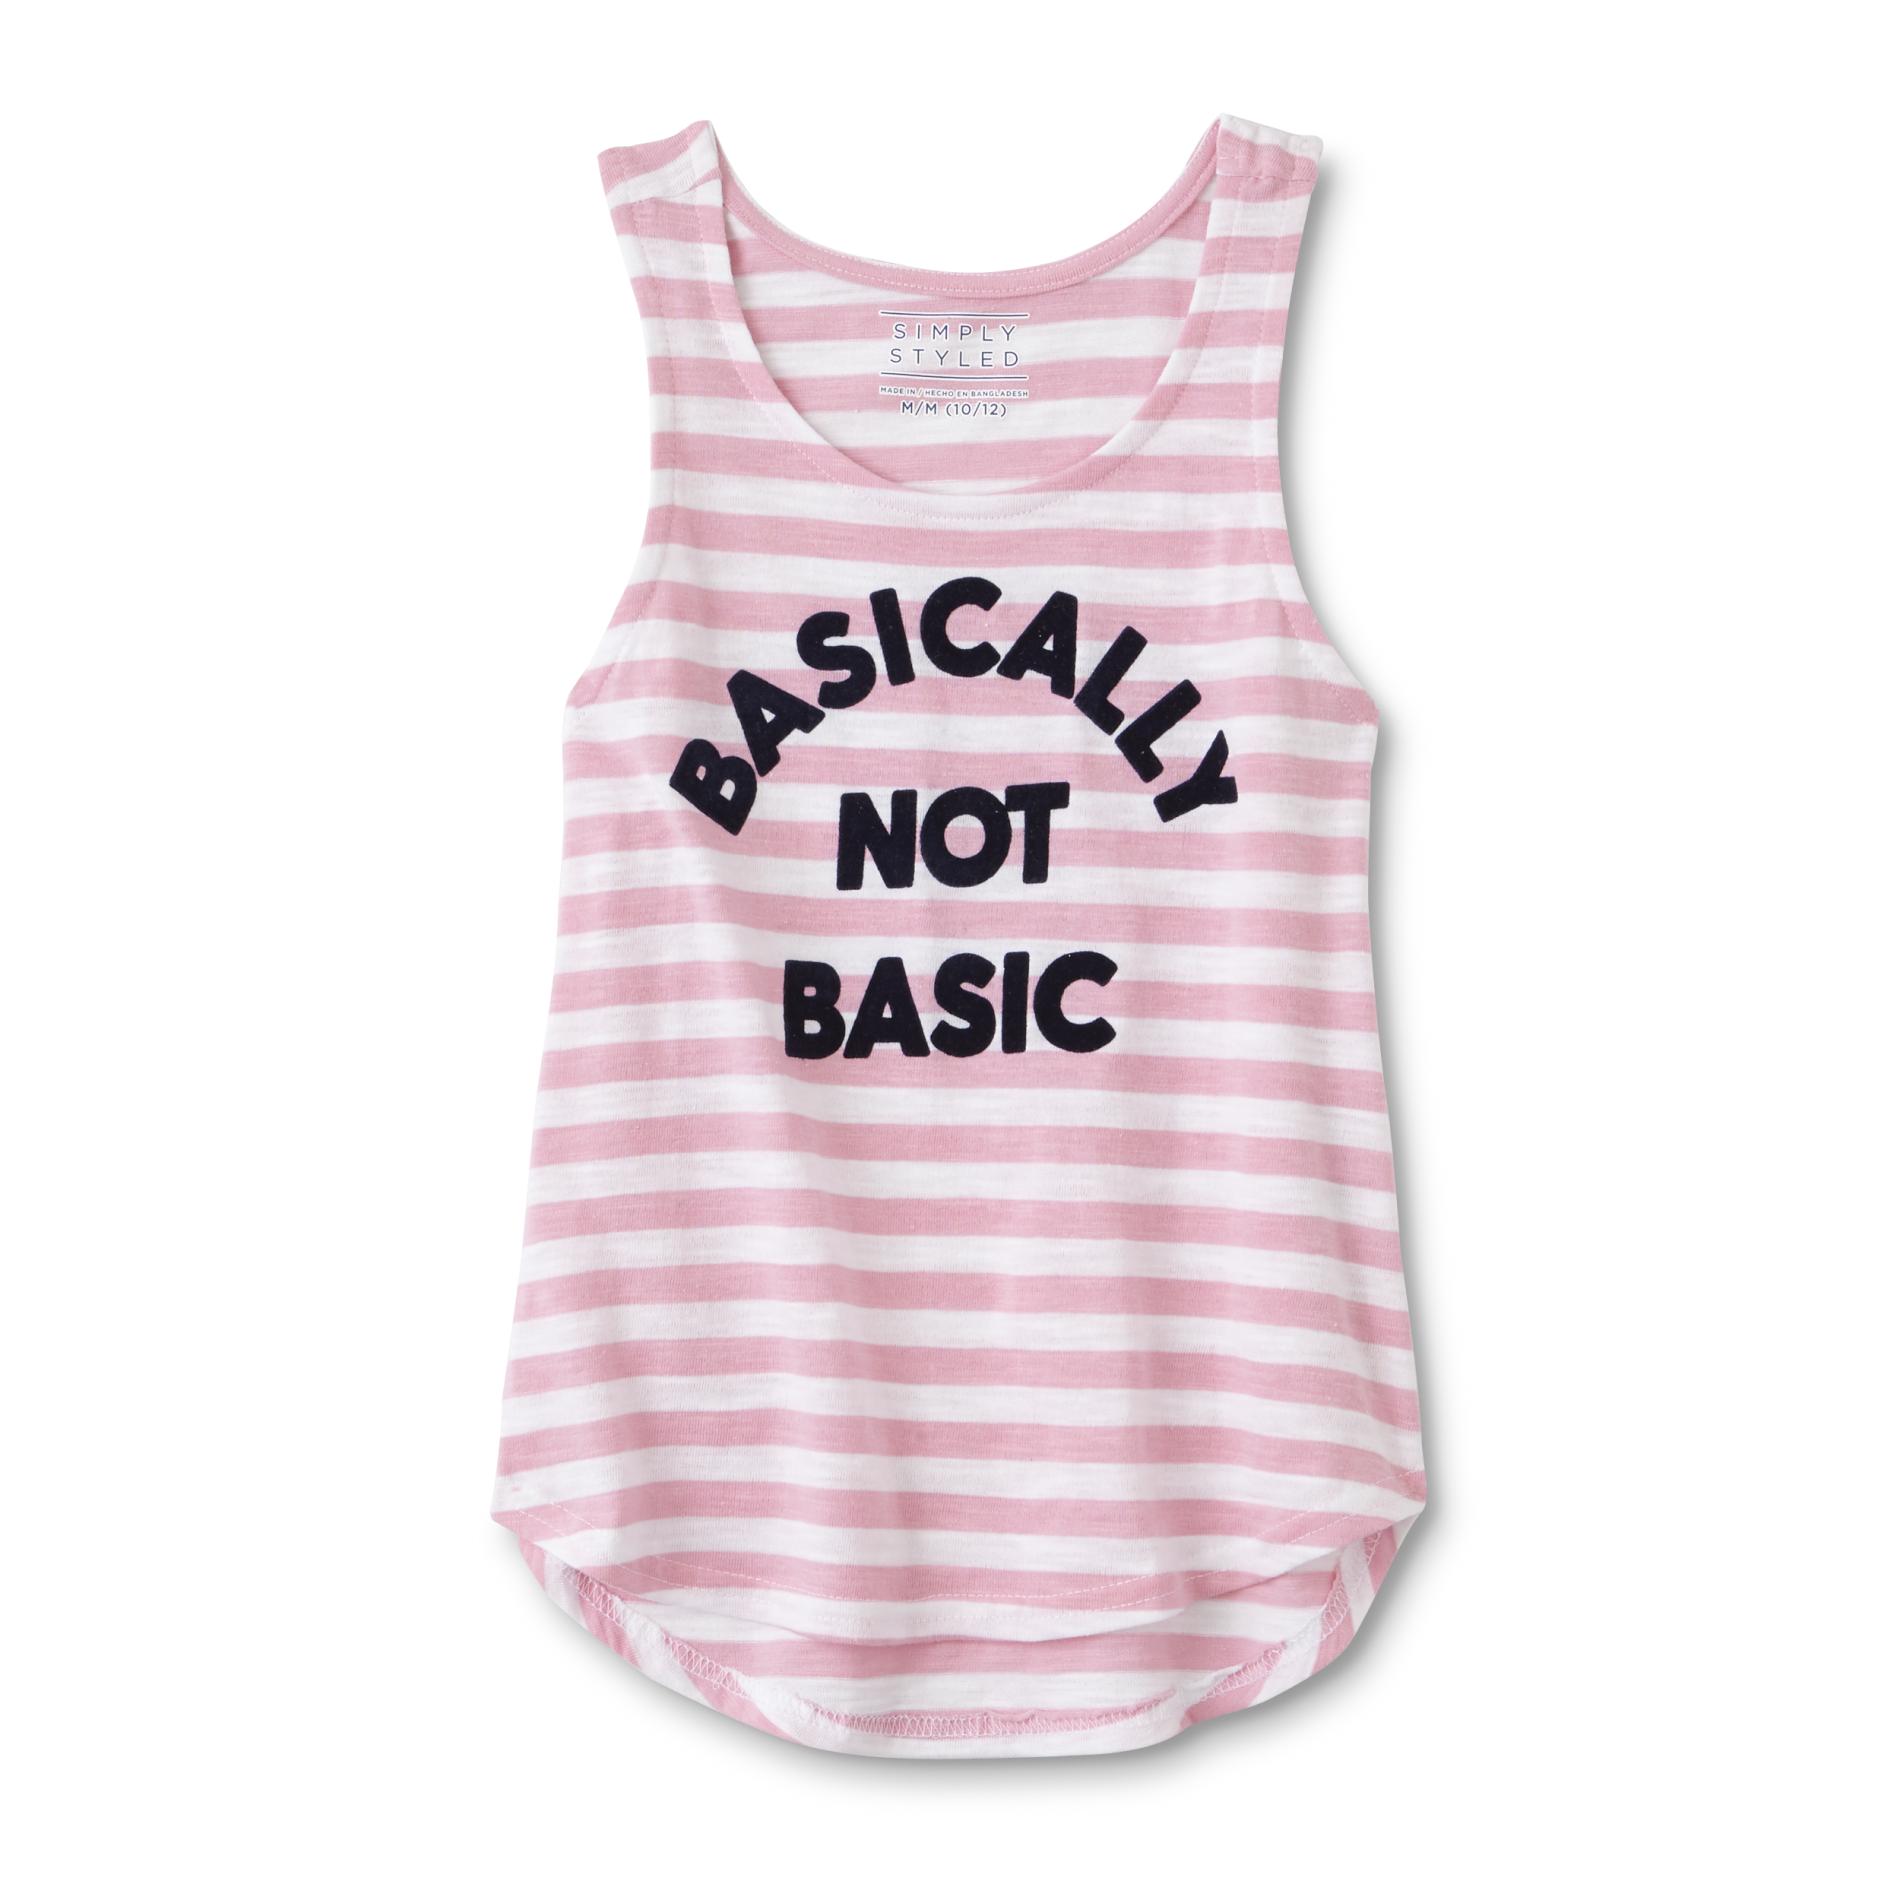 Simply Styled Girls' Graphic Tank Top - Basically Not Basic